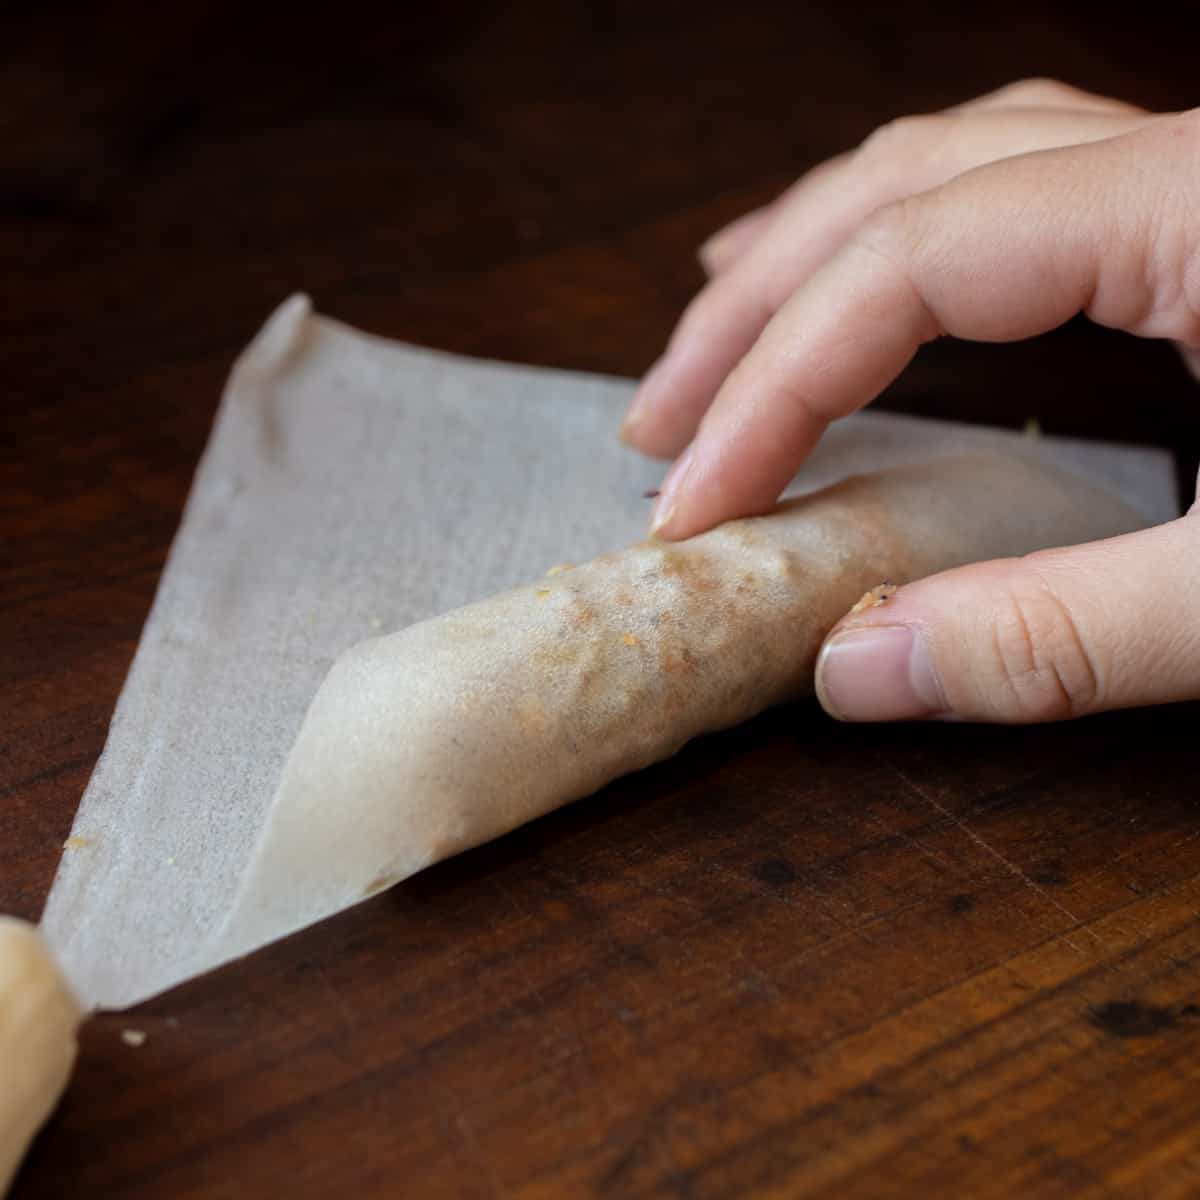 A lumpia in the process of being rolled.